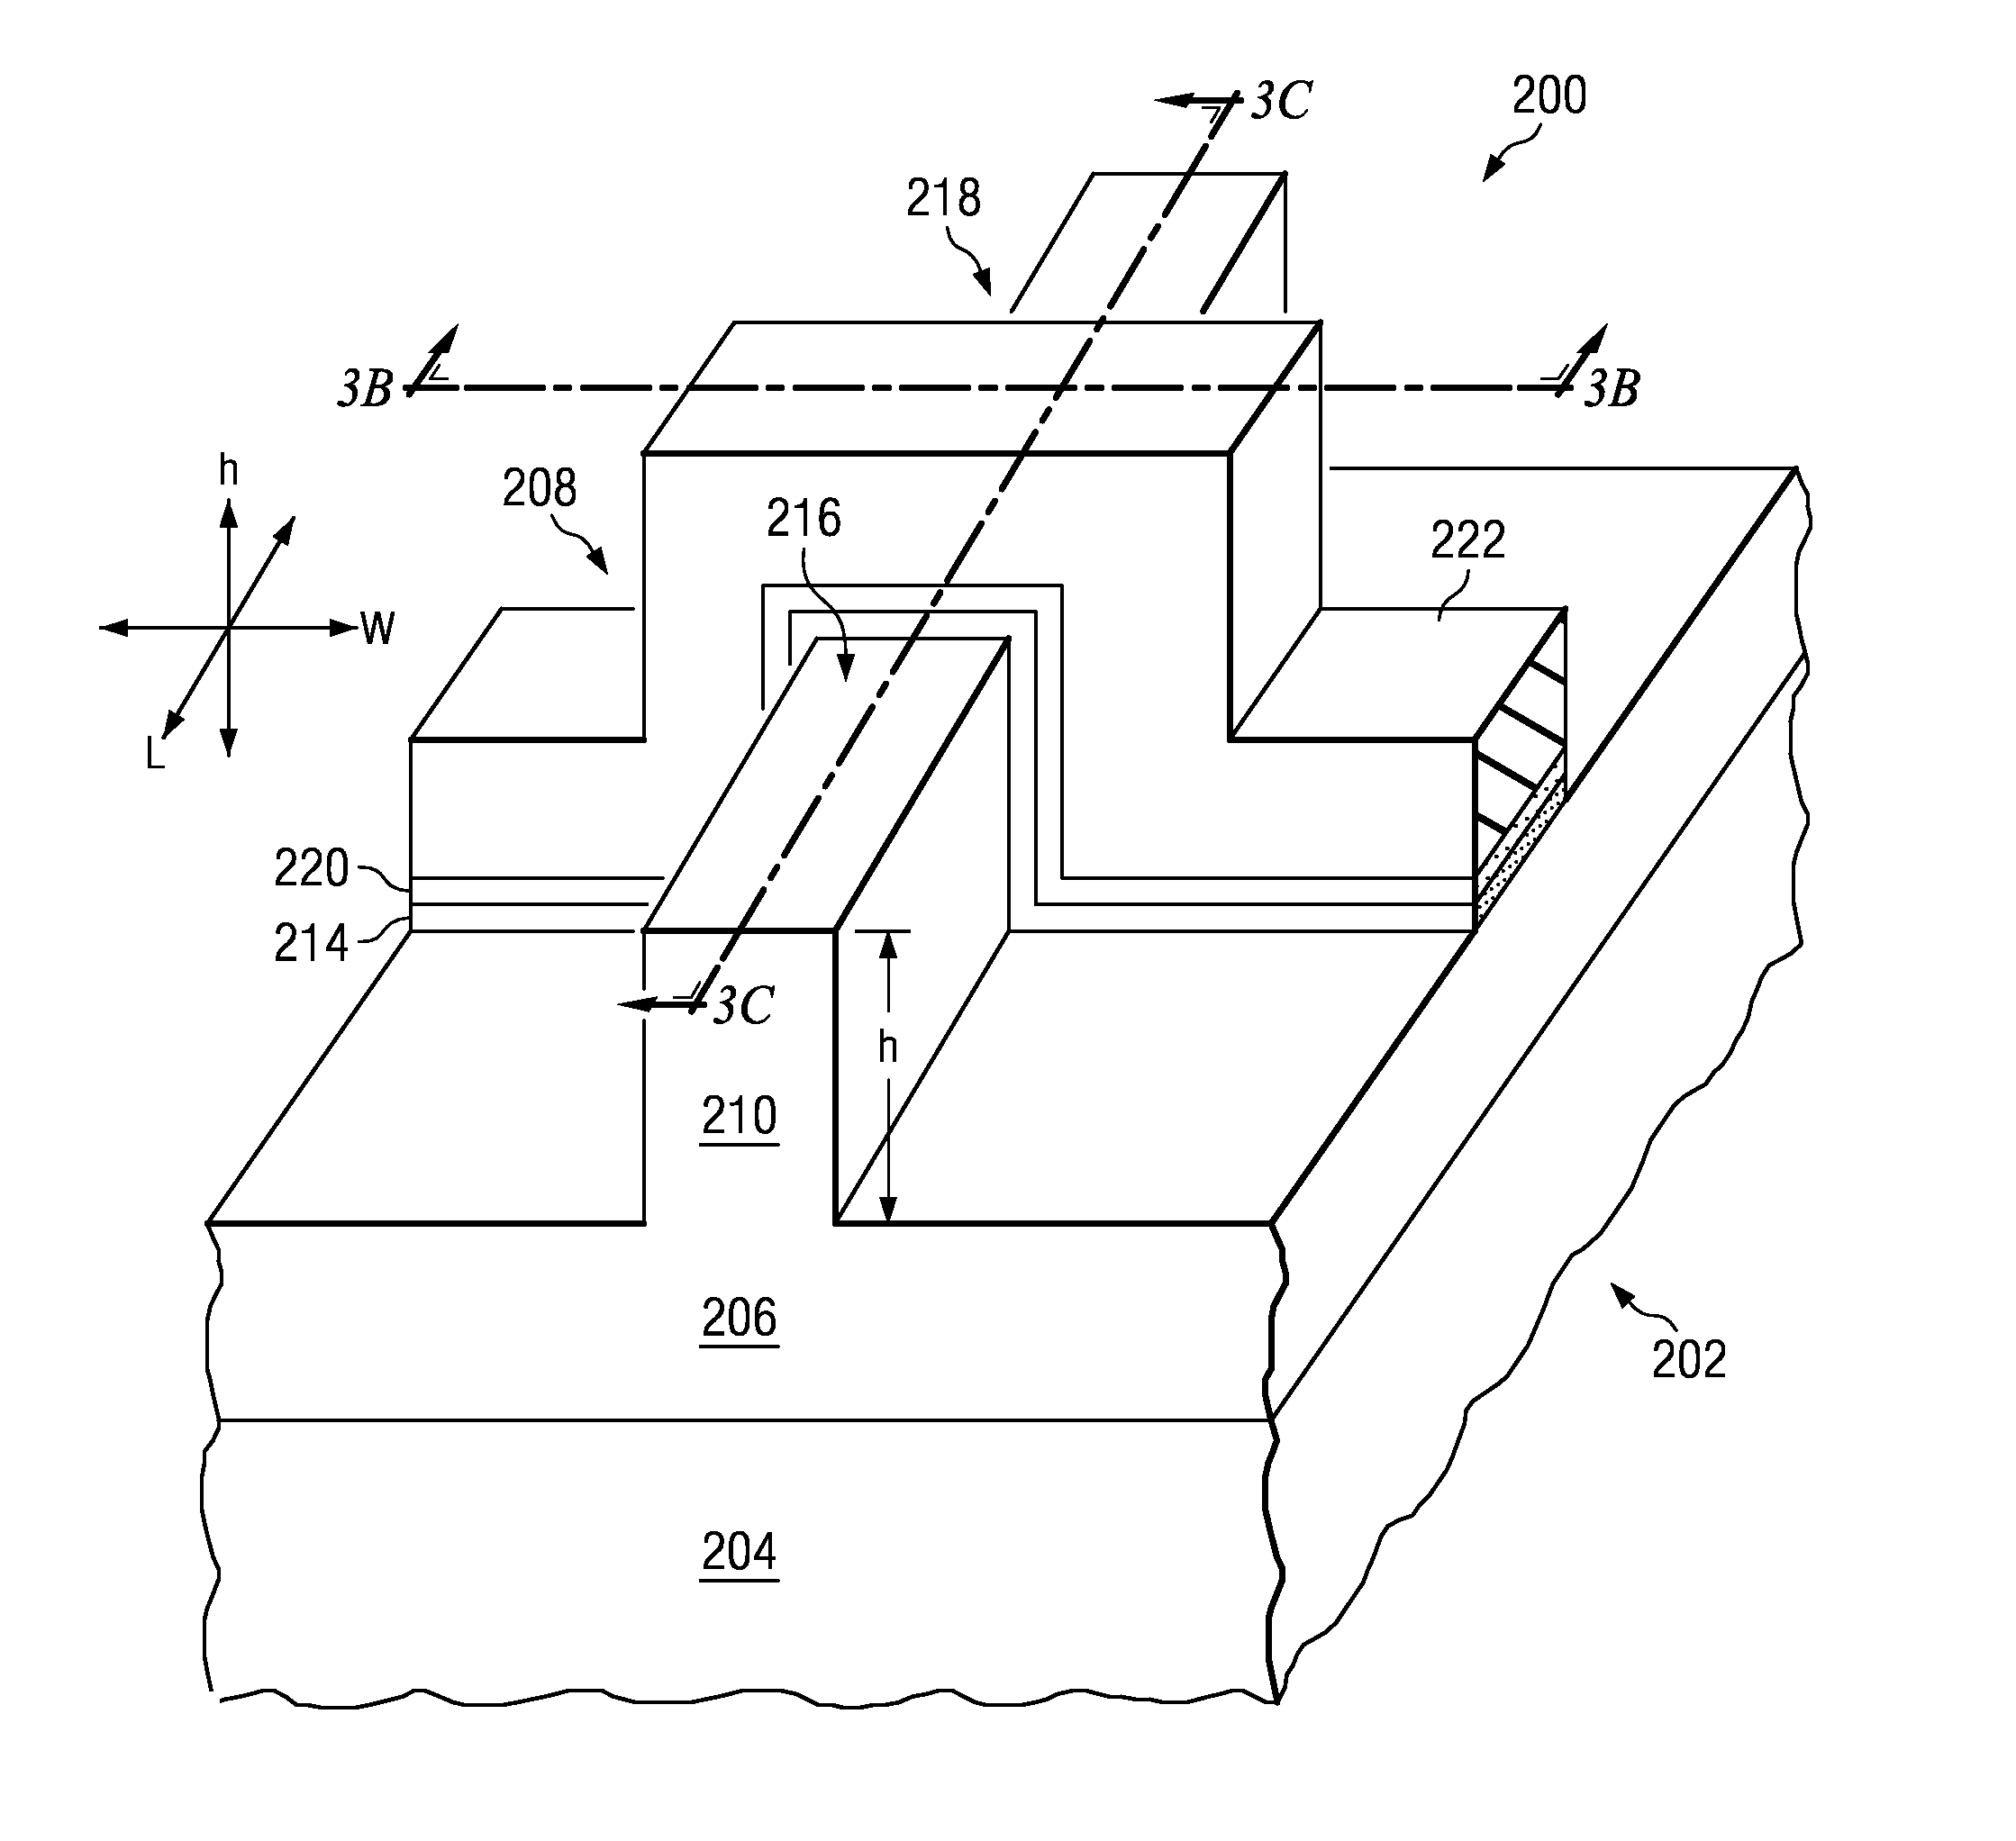 Varying mugfet width to adjust device characteristics